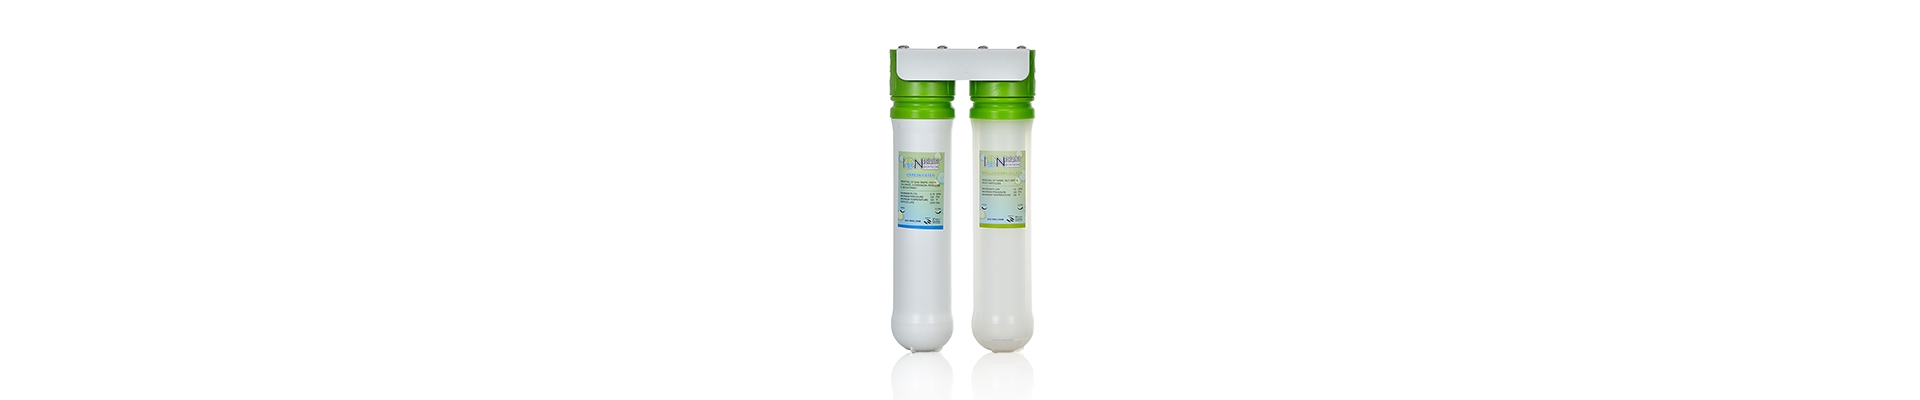 IT-P202 Water Filters